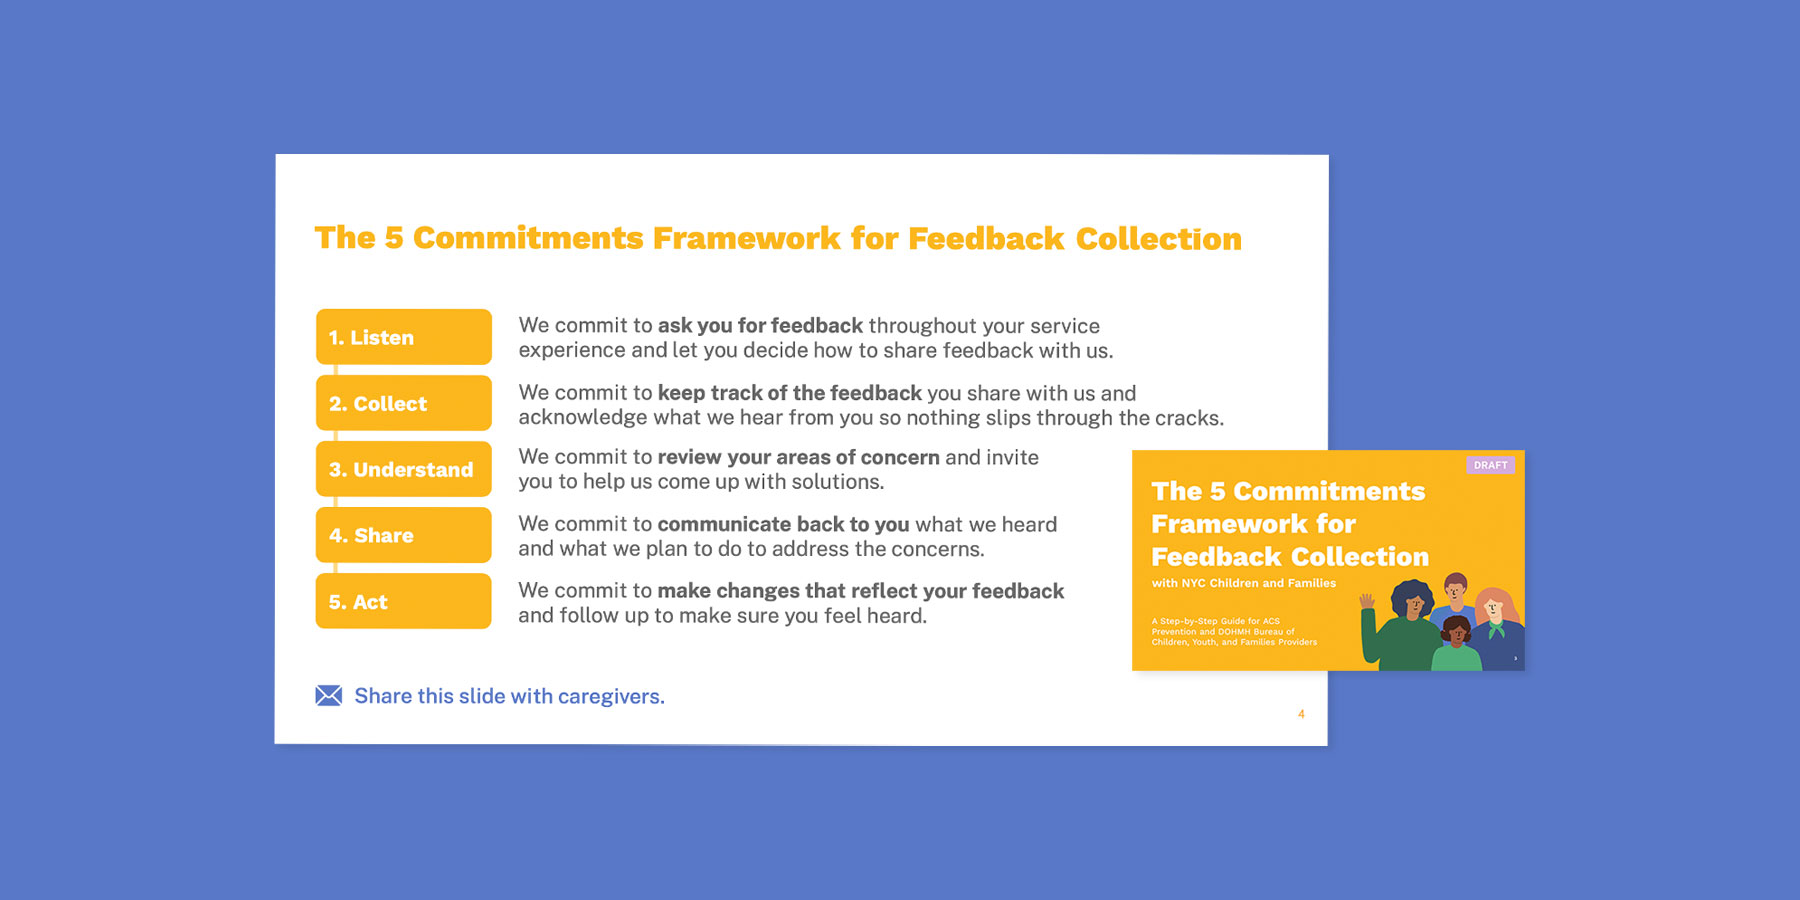 Diagram showing that the five commitments for feedback collection are to listen, collect, understand, share, and act.